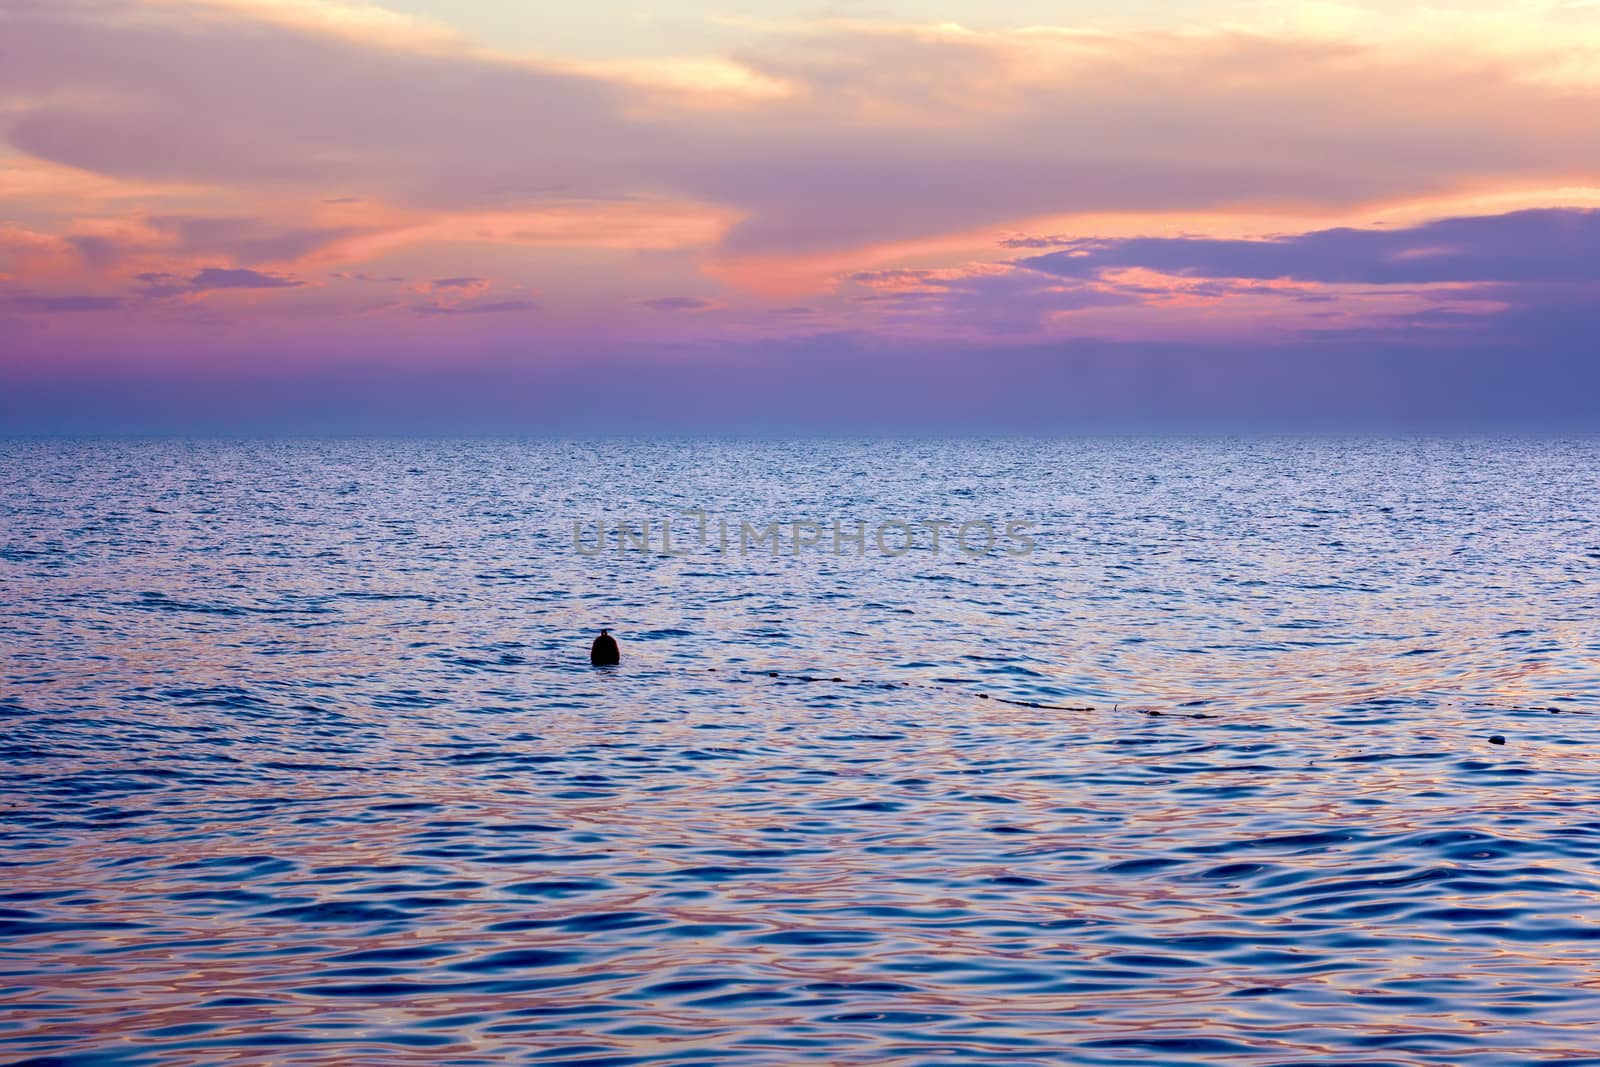 Violet tint clouds reflected in the sea surface after sunset. Float the bounding coastal sways on the waves